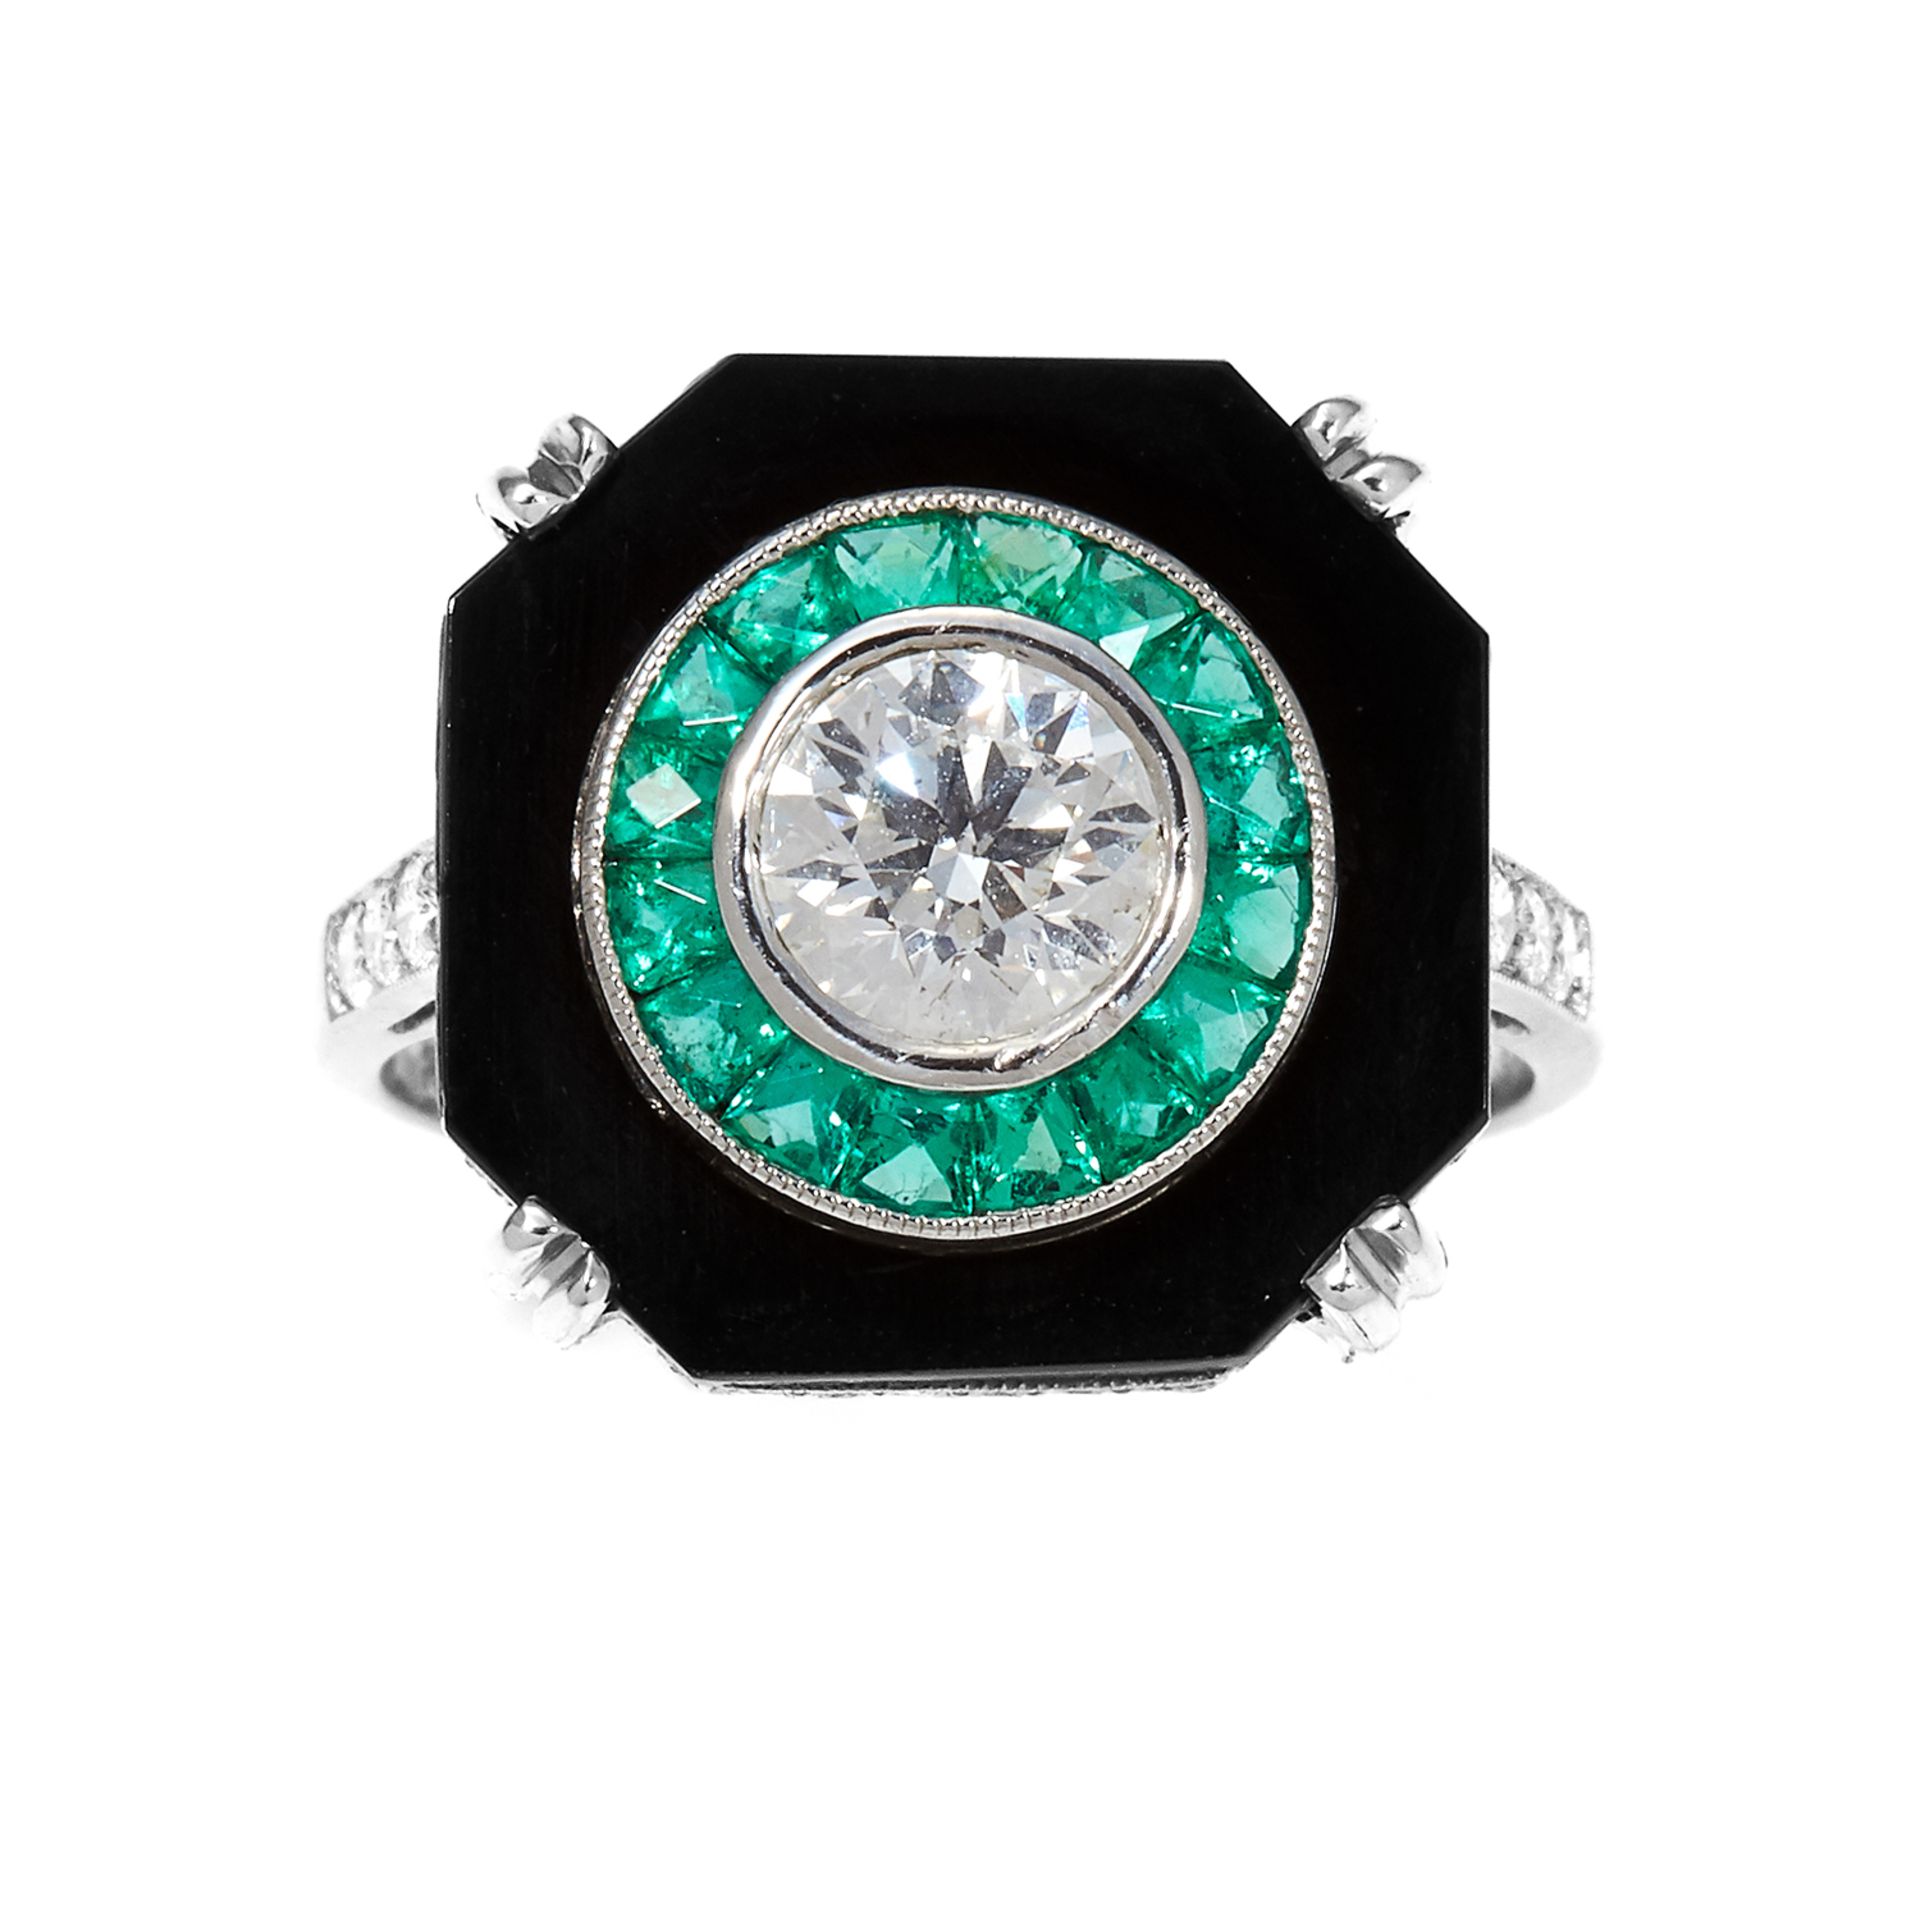 A DIAMOND, EMERALD AND ONYX DRESS RING in platinum, set with a central round cut diamond of 0.85